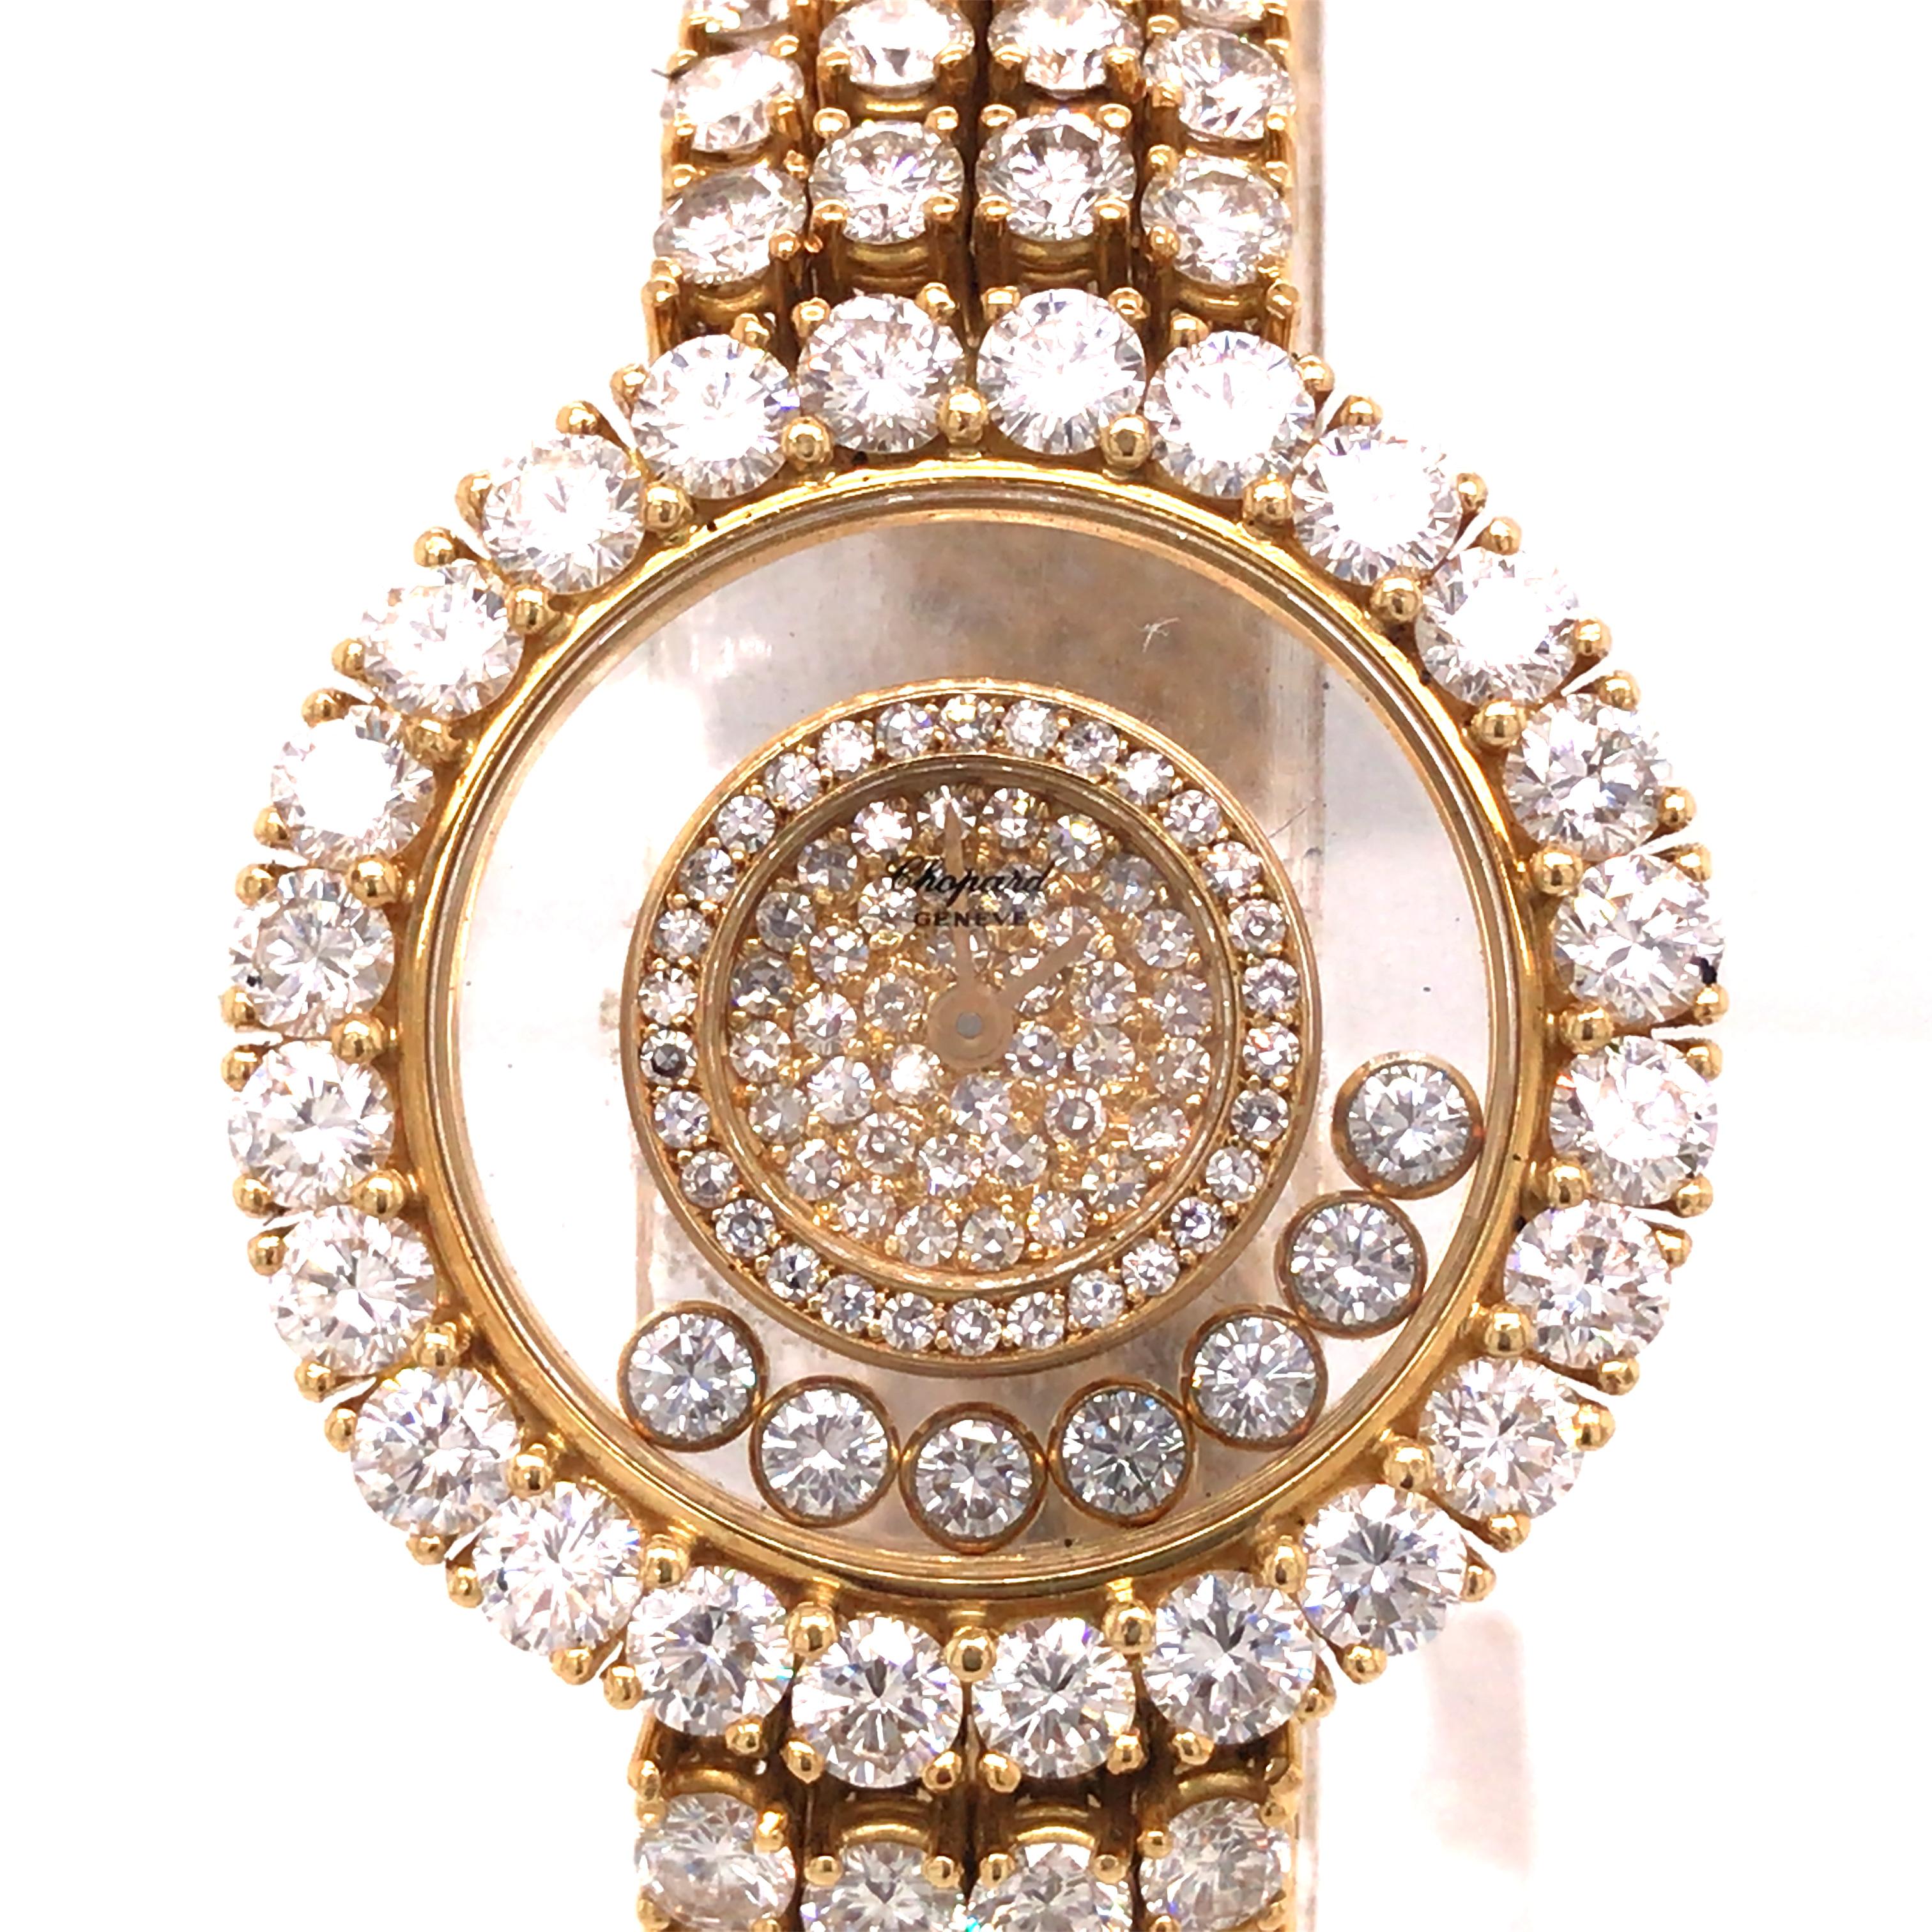 Chopard 24 Carat Happy Diamond Watch in 18K Yellow Gold.  Round Brilliant Cut Diamonds weighing 24 carat total weight, D-E in color and VVS2 in clarity are expertly set in the band, bezel and inside the face of the watch.  The watch measures 7 in